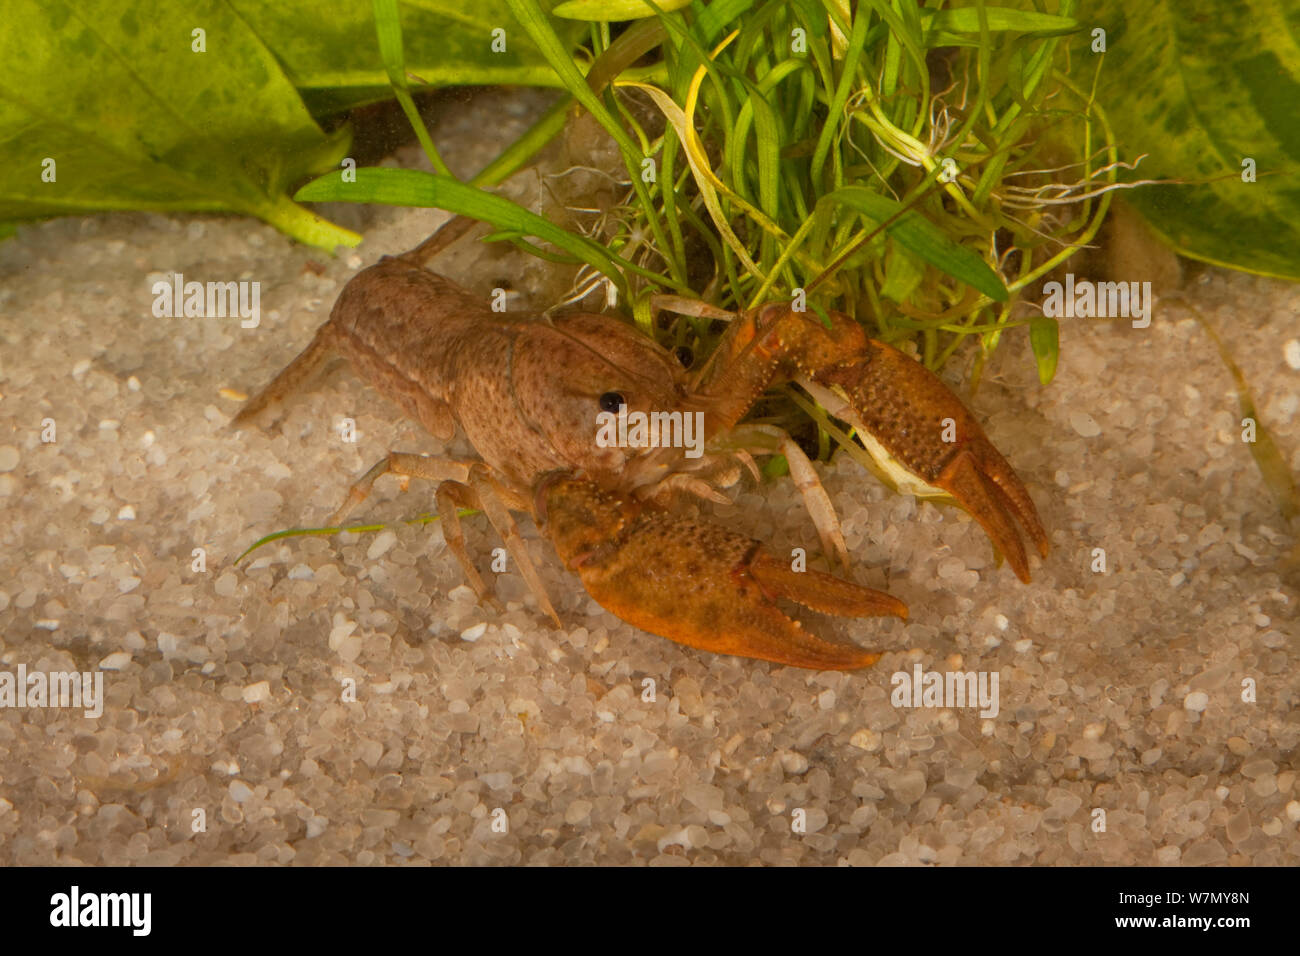 Hatchet crayfish (Procambarus kilbyi) speckled phase,  Bay Co, Florida, USA. Controlled conditions Stock Photo